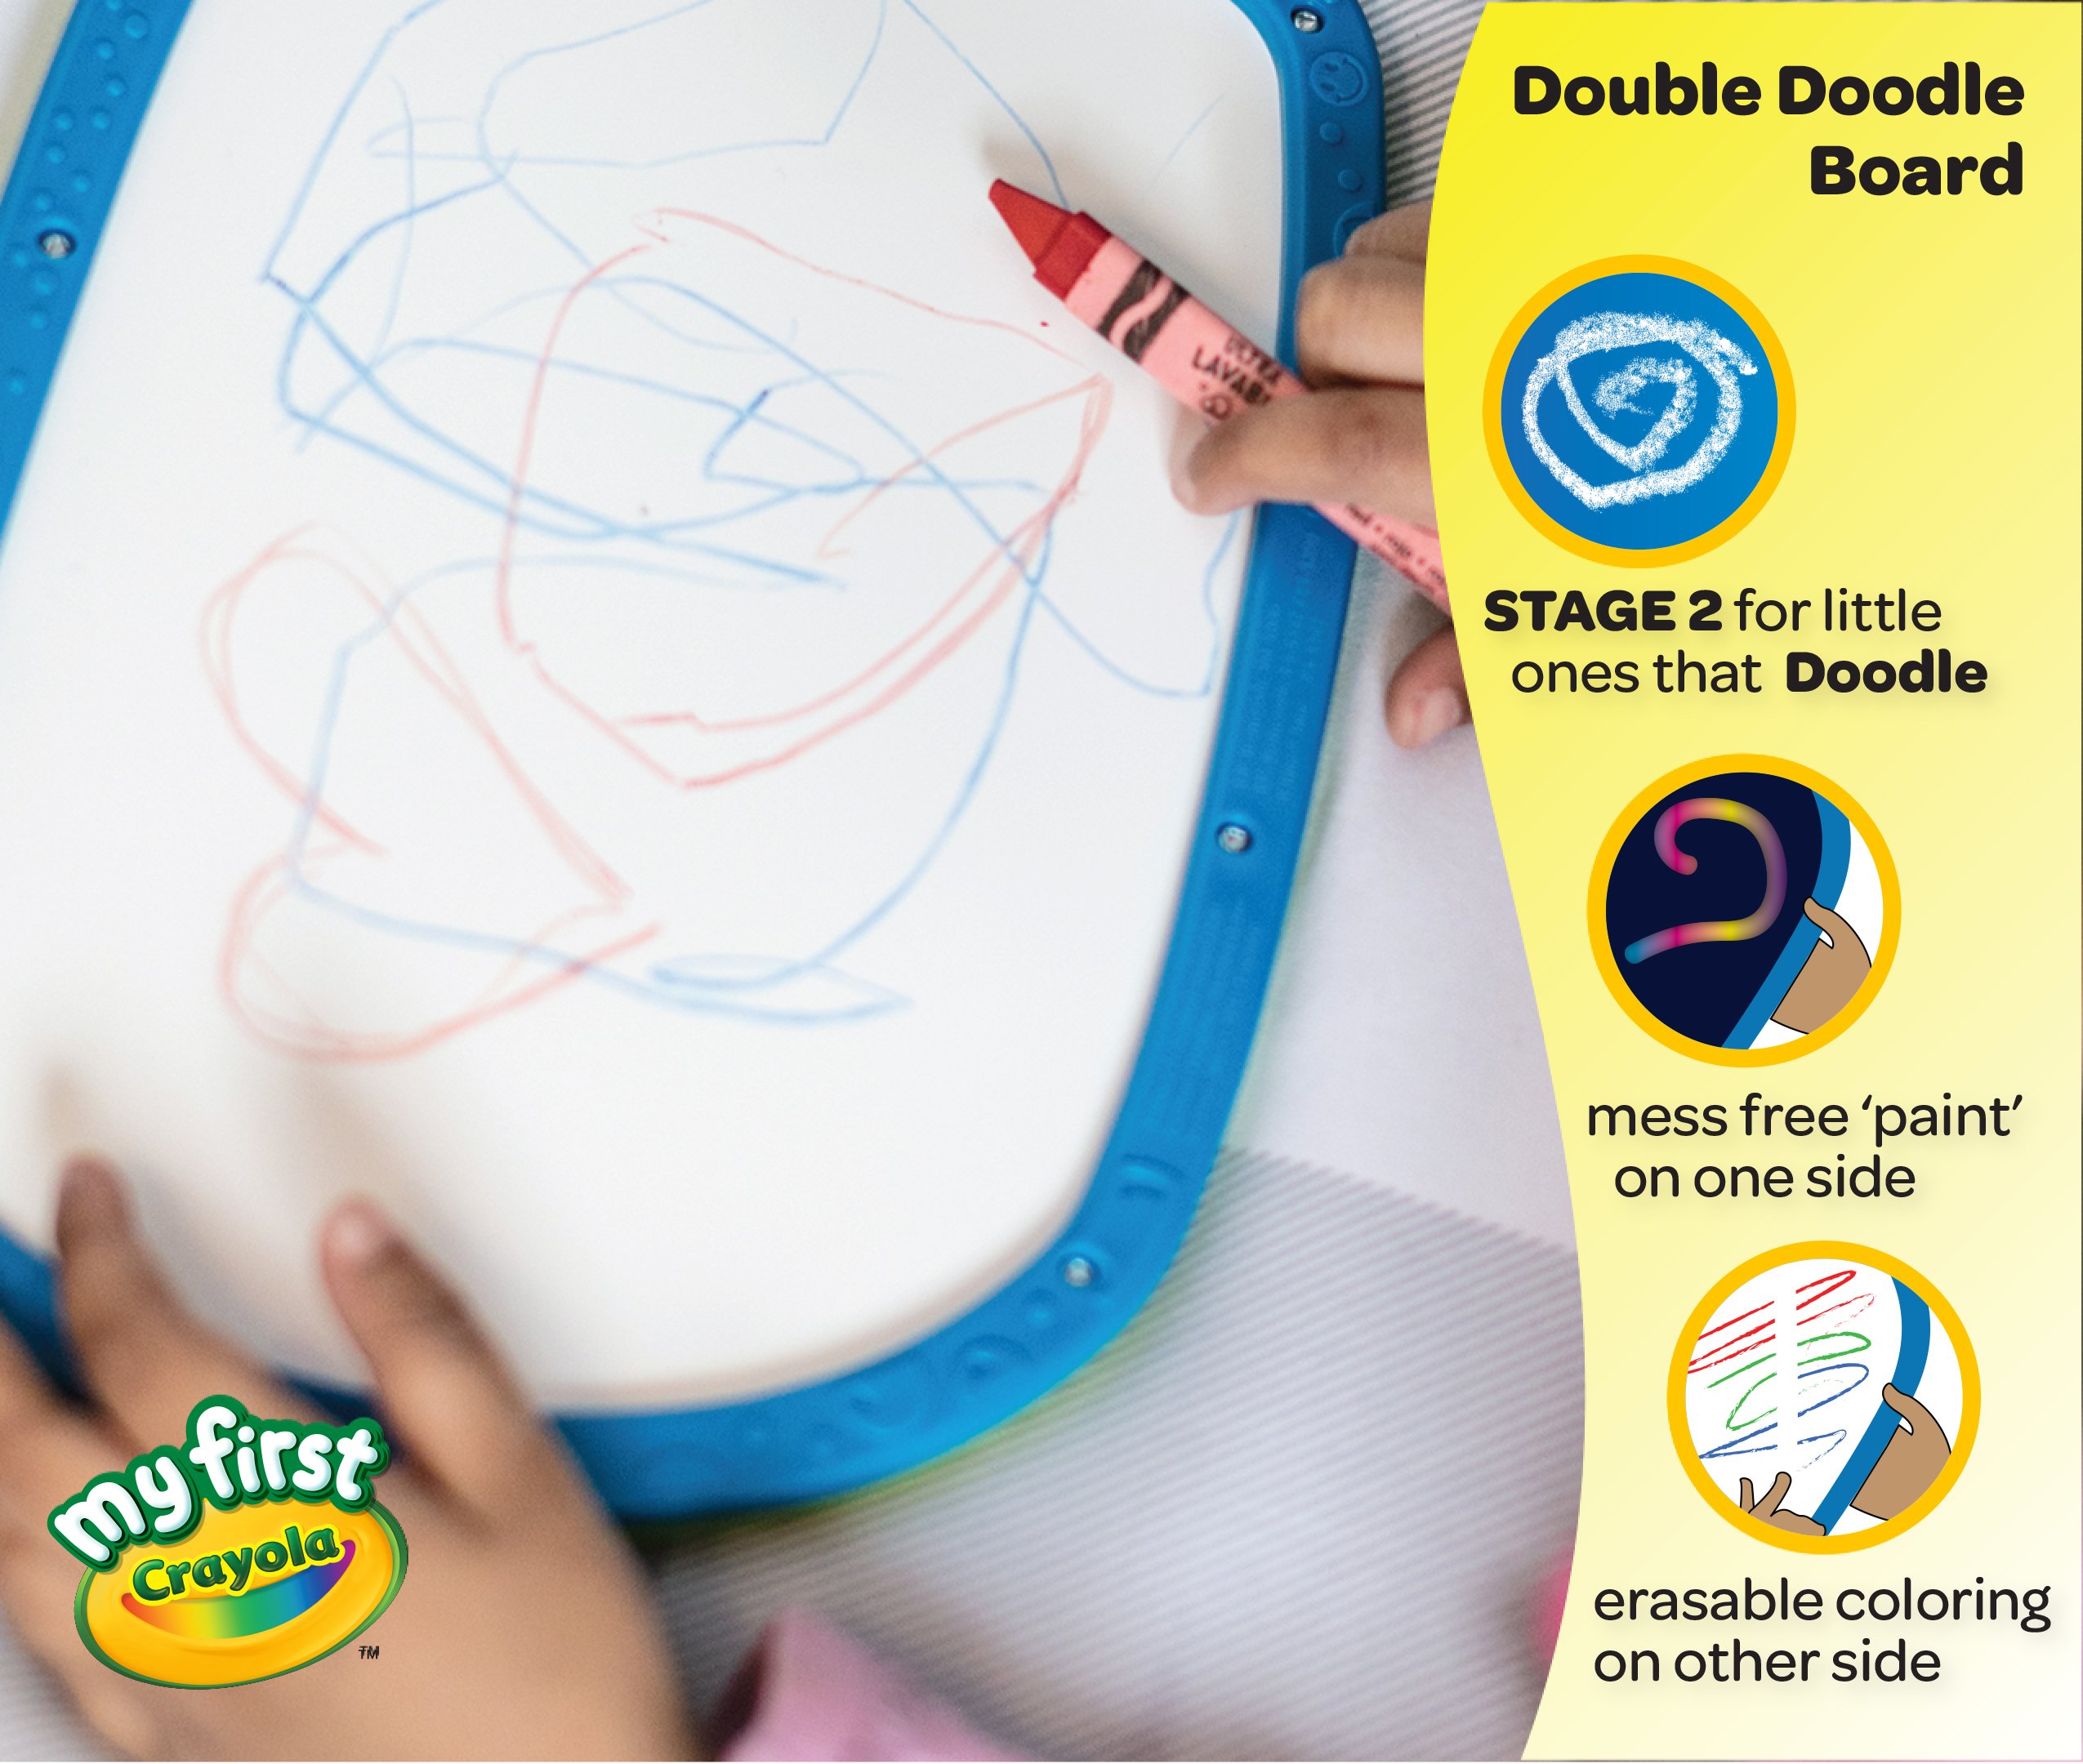 My First Crayola Double Doodle Board, Drawing Tablet, Toddler Toy, Gift